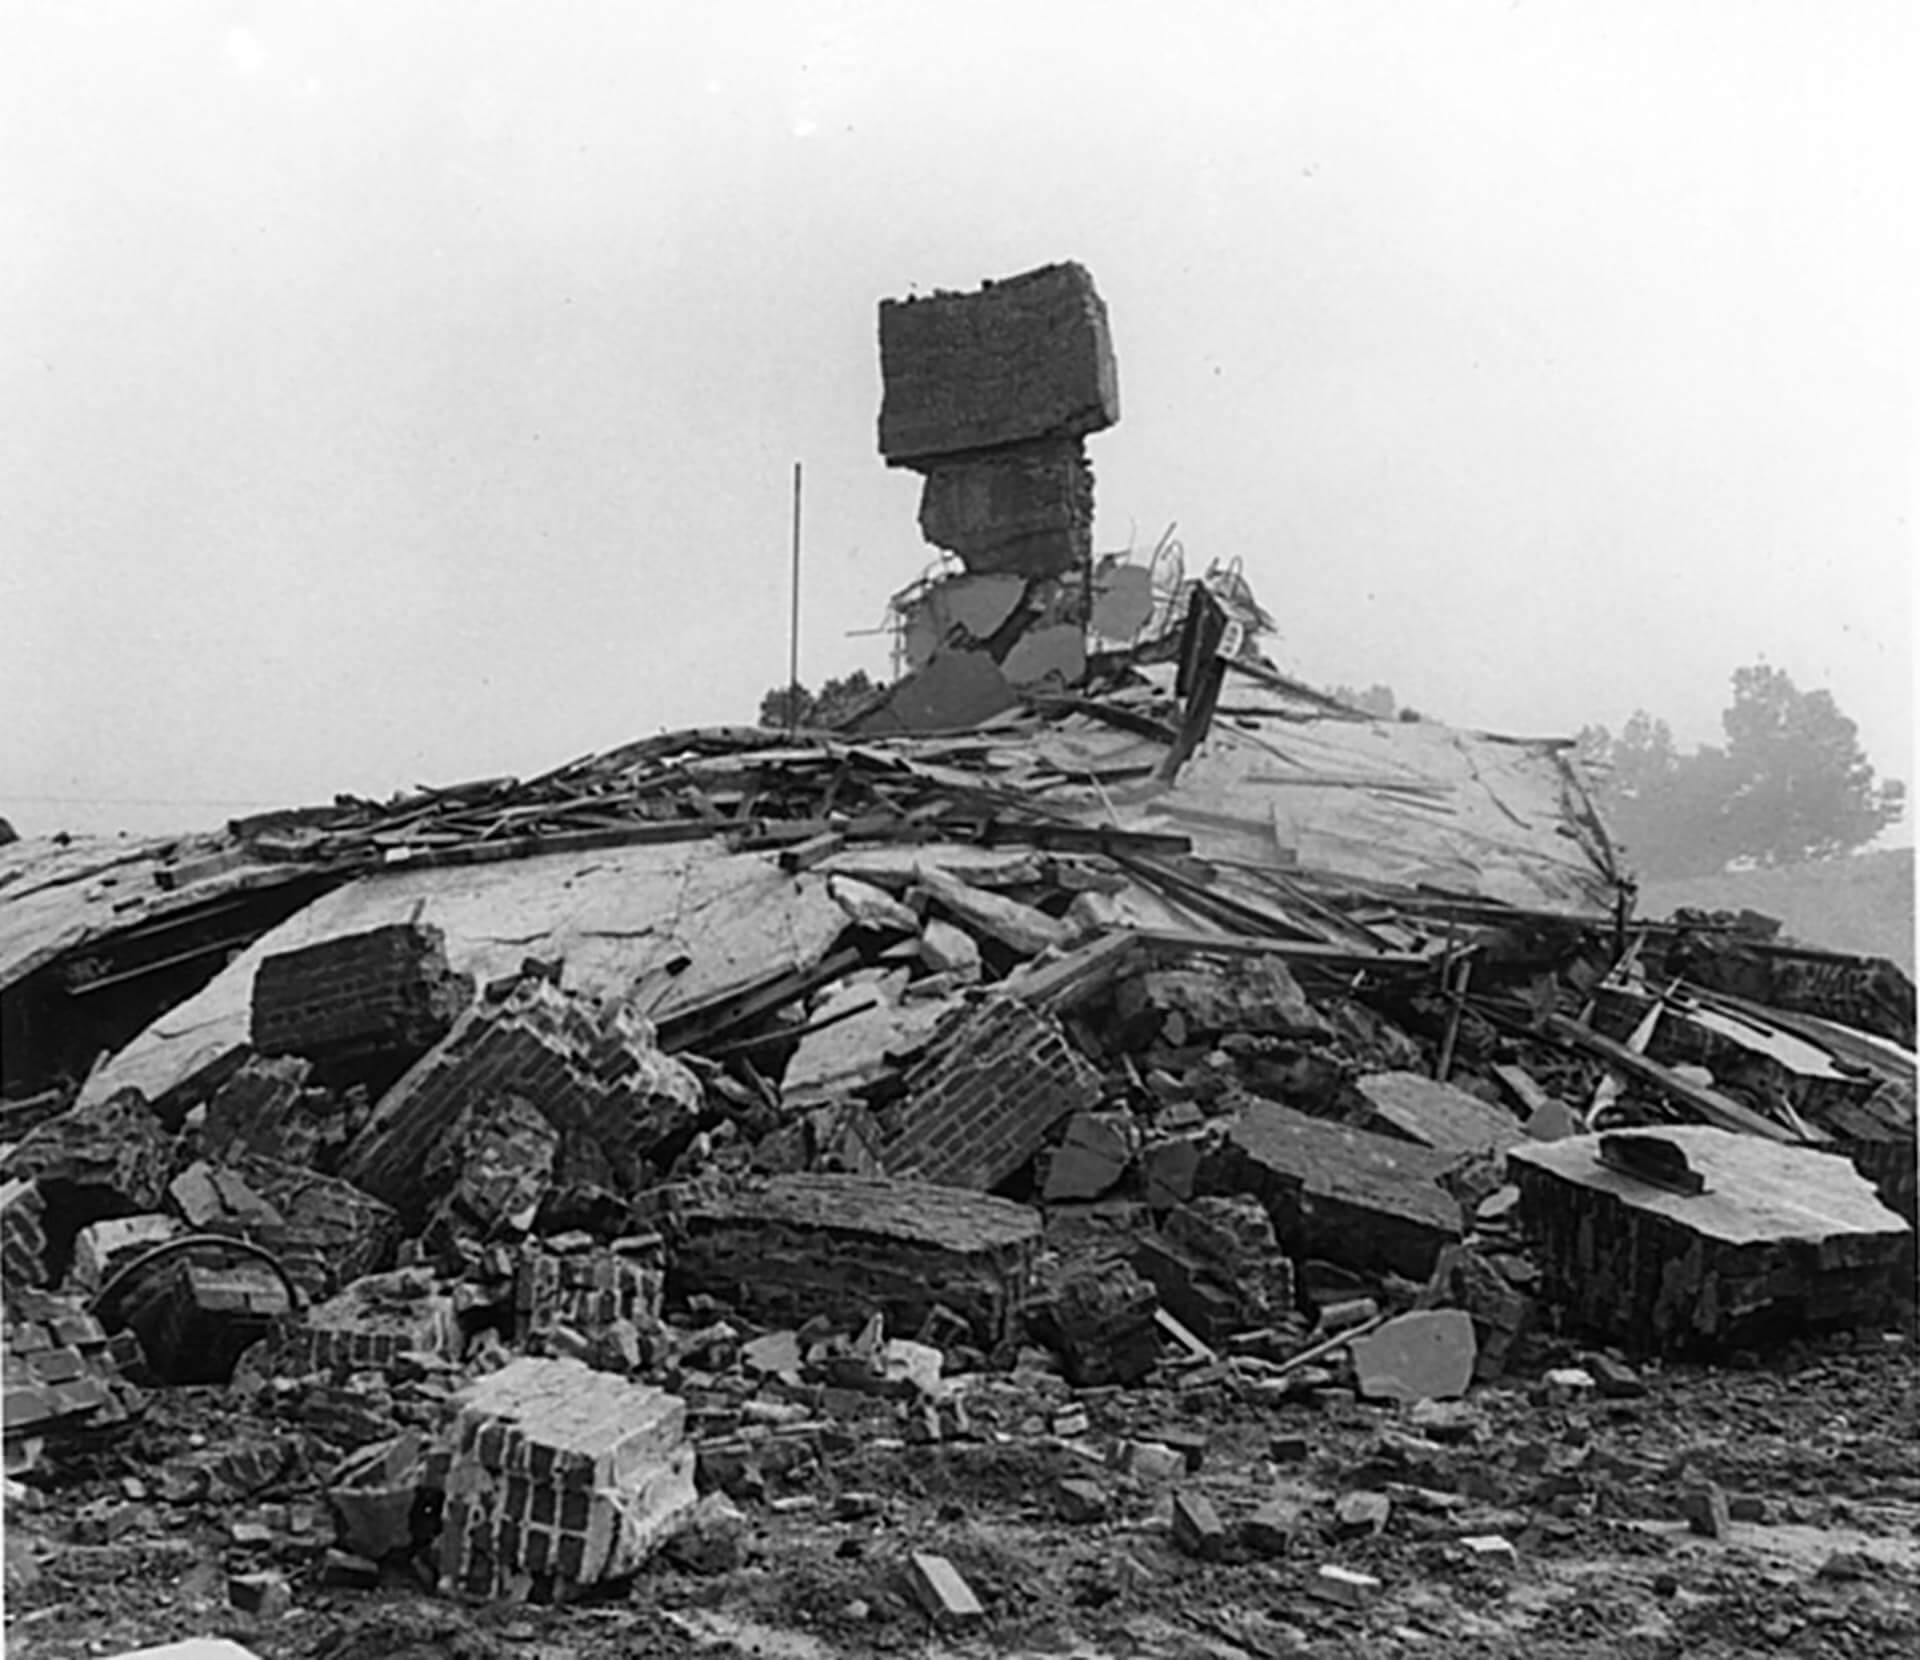 A large pile of rubble where the old tire plant once stood